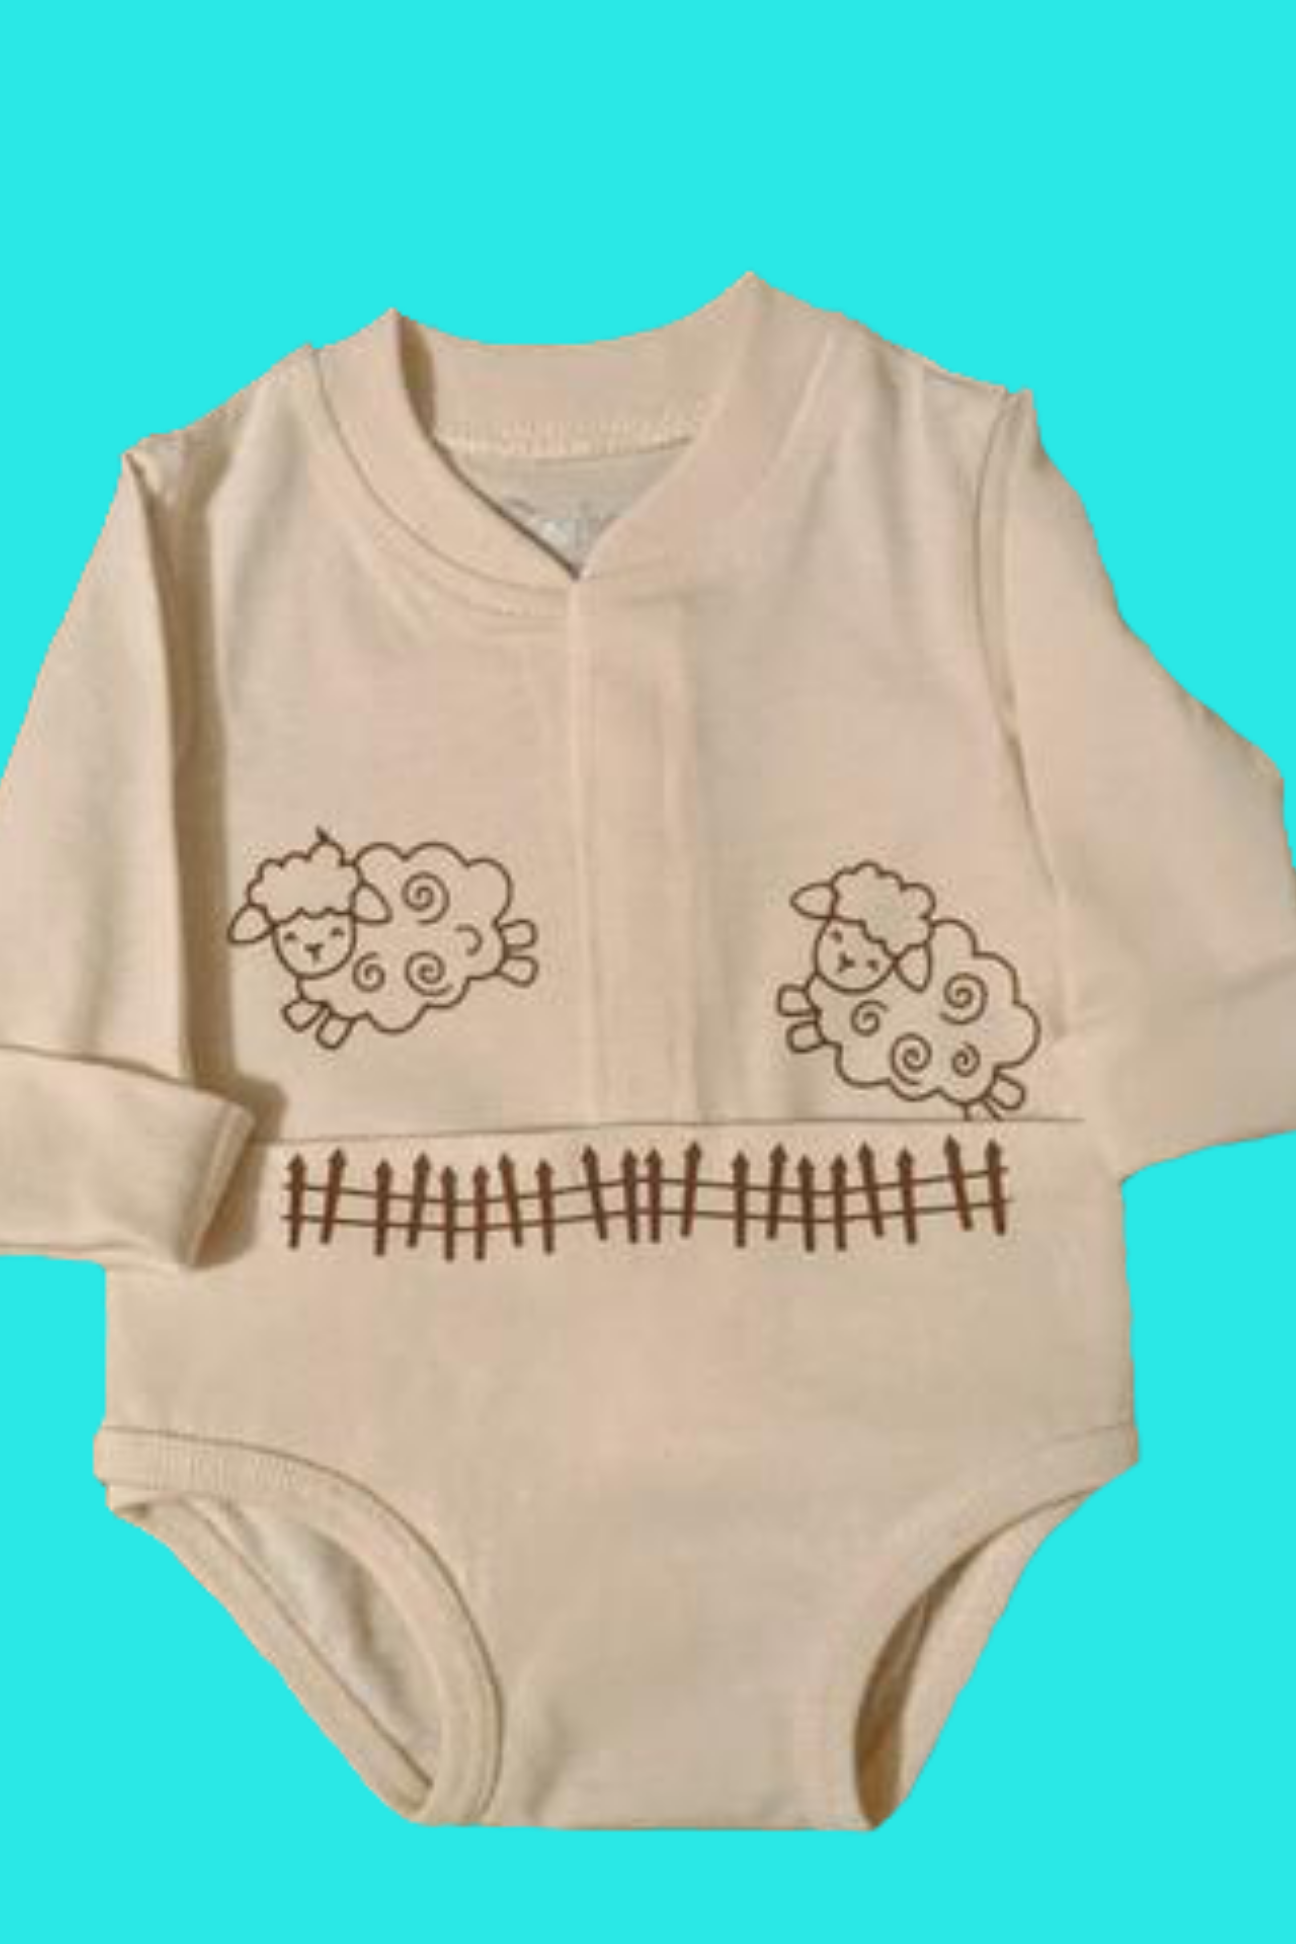 Counting Sheep Baby Bodysuit